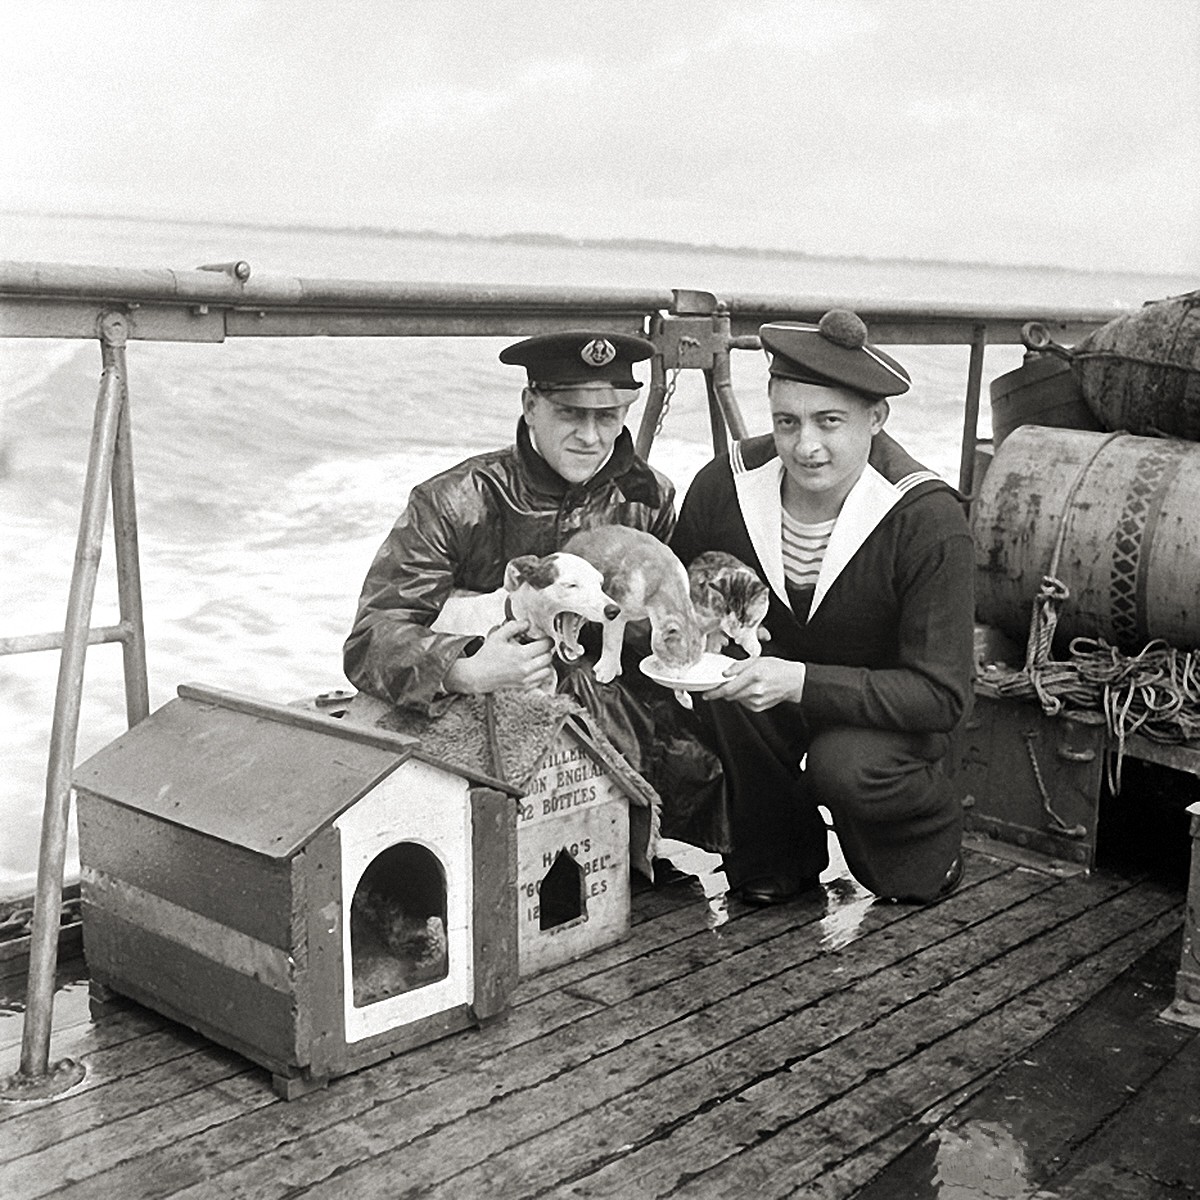 00-0h-cats-at-war-french-training-ship-theodore-tissier-1940.jpg